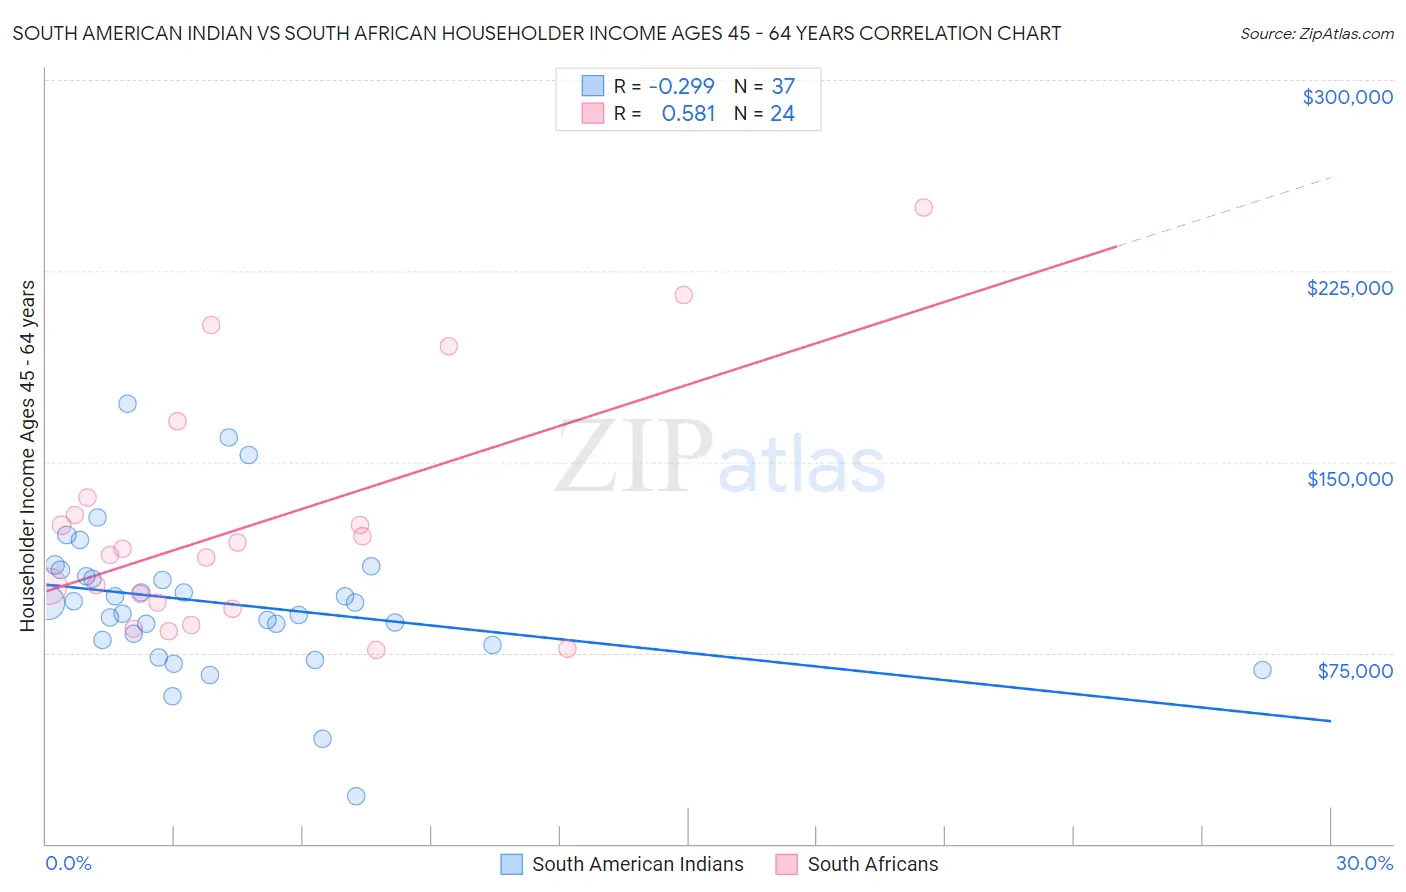 South American Indian vs South African Householder Income Ages 45 - 64 years